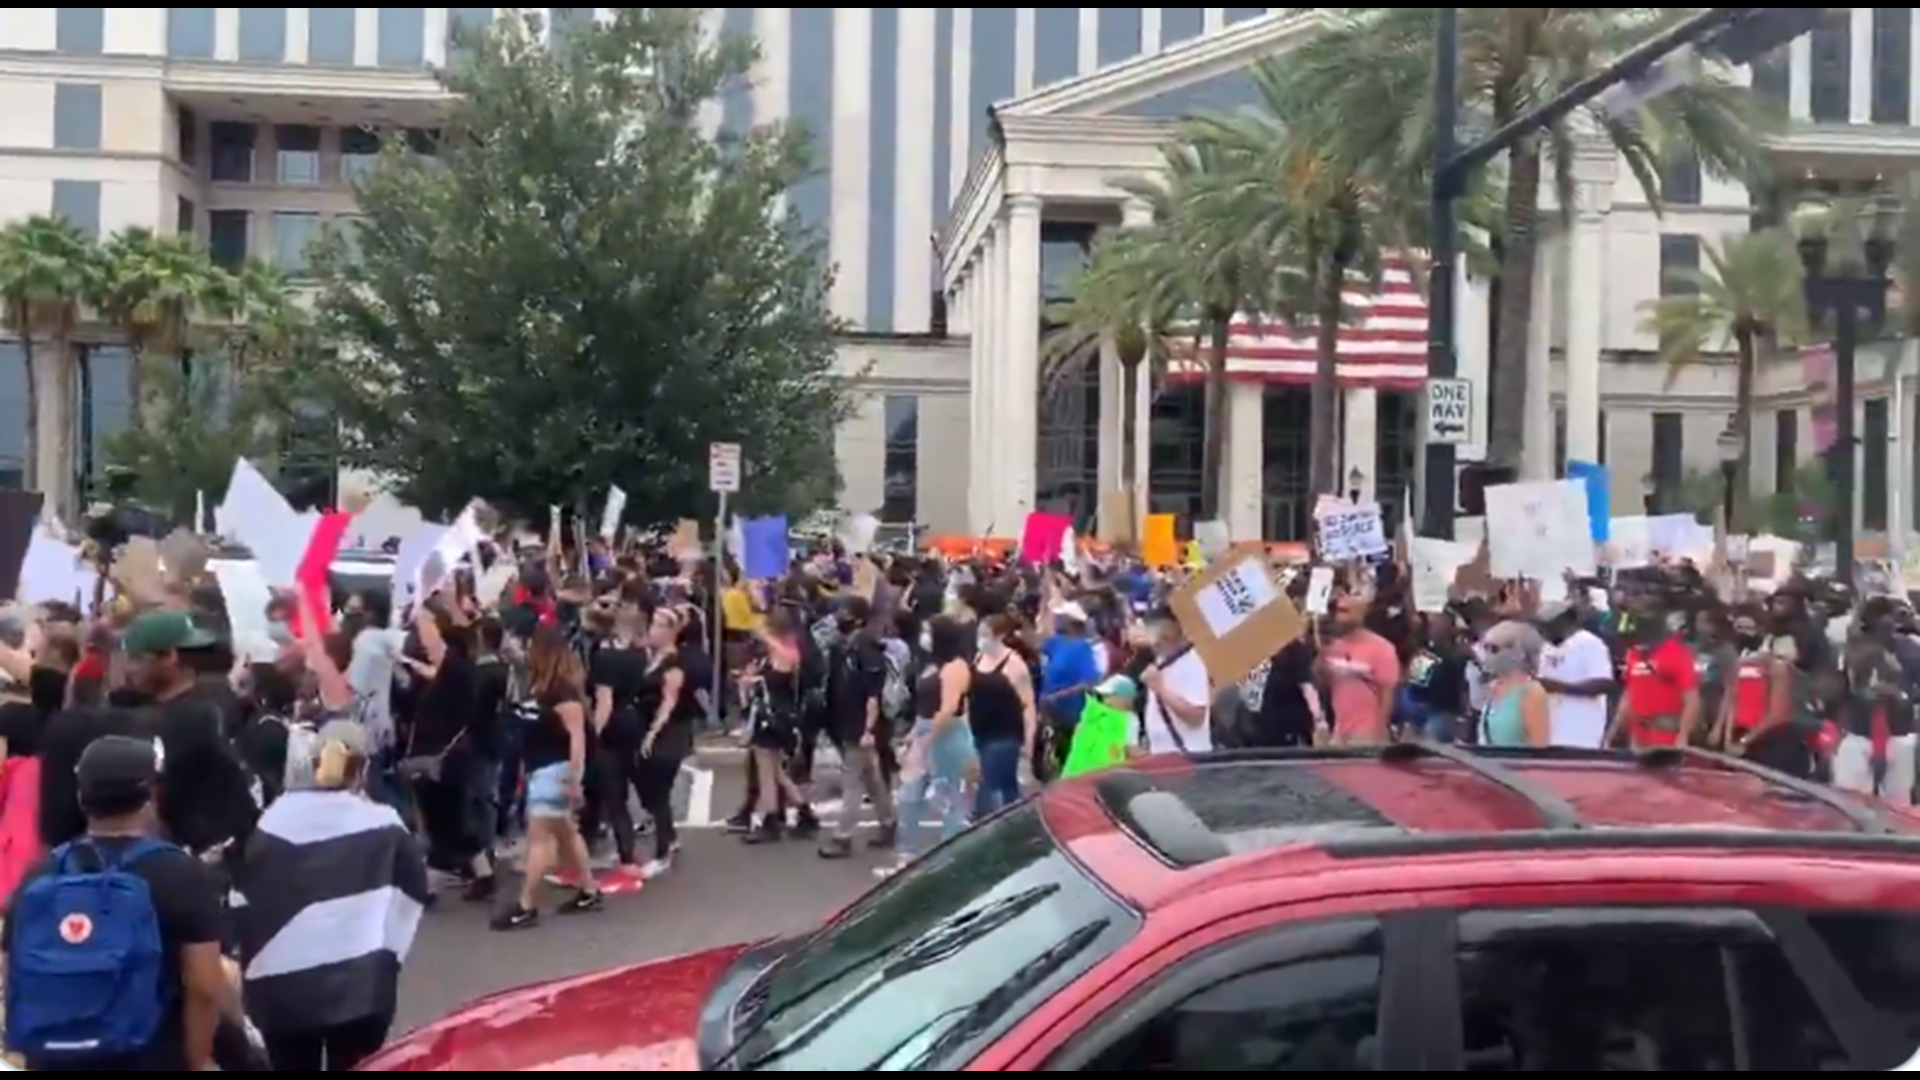 The protest is to demand that State Attorney Melissa Nelson, "drops the charges, releases the body camera footage, jails killer cops and stands up to JSO bullying."